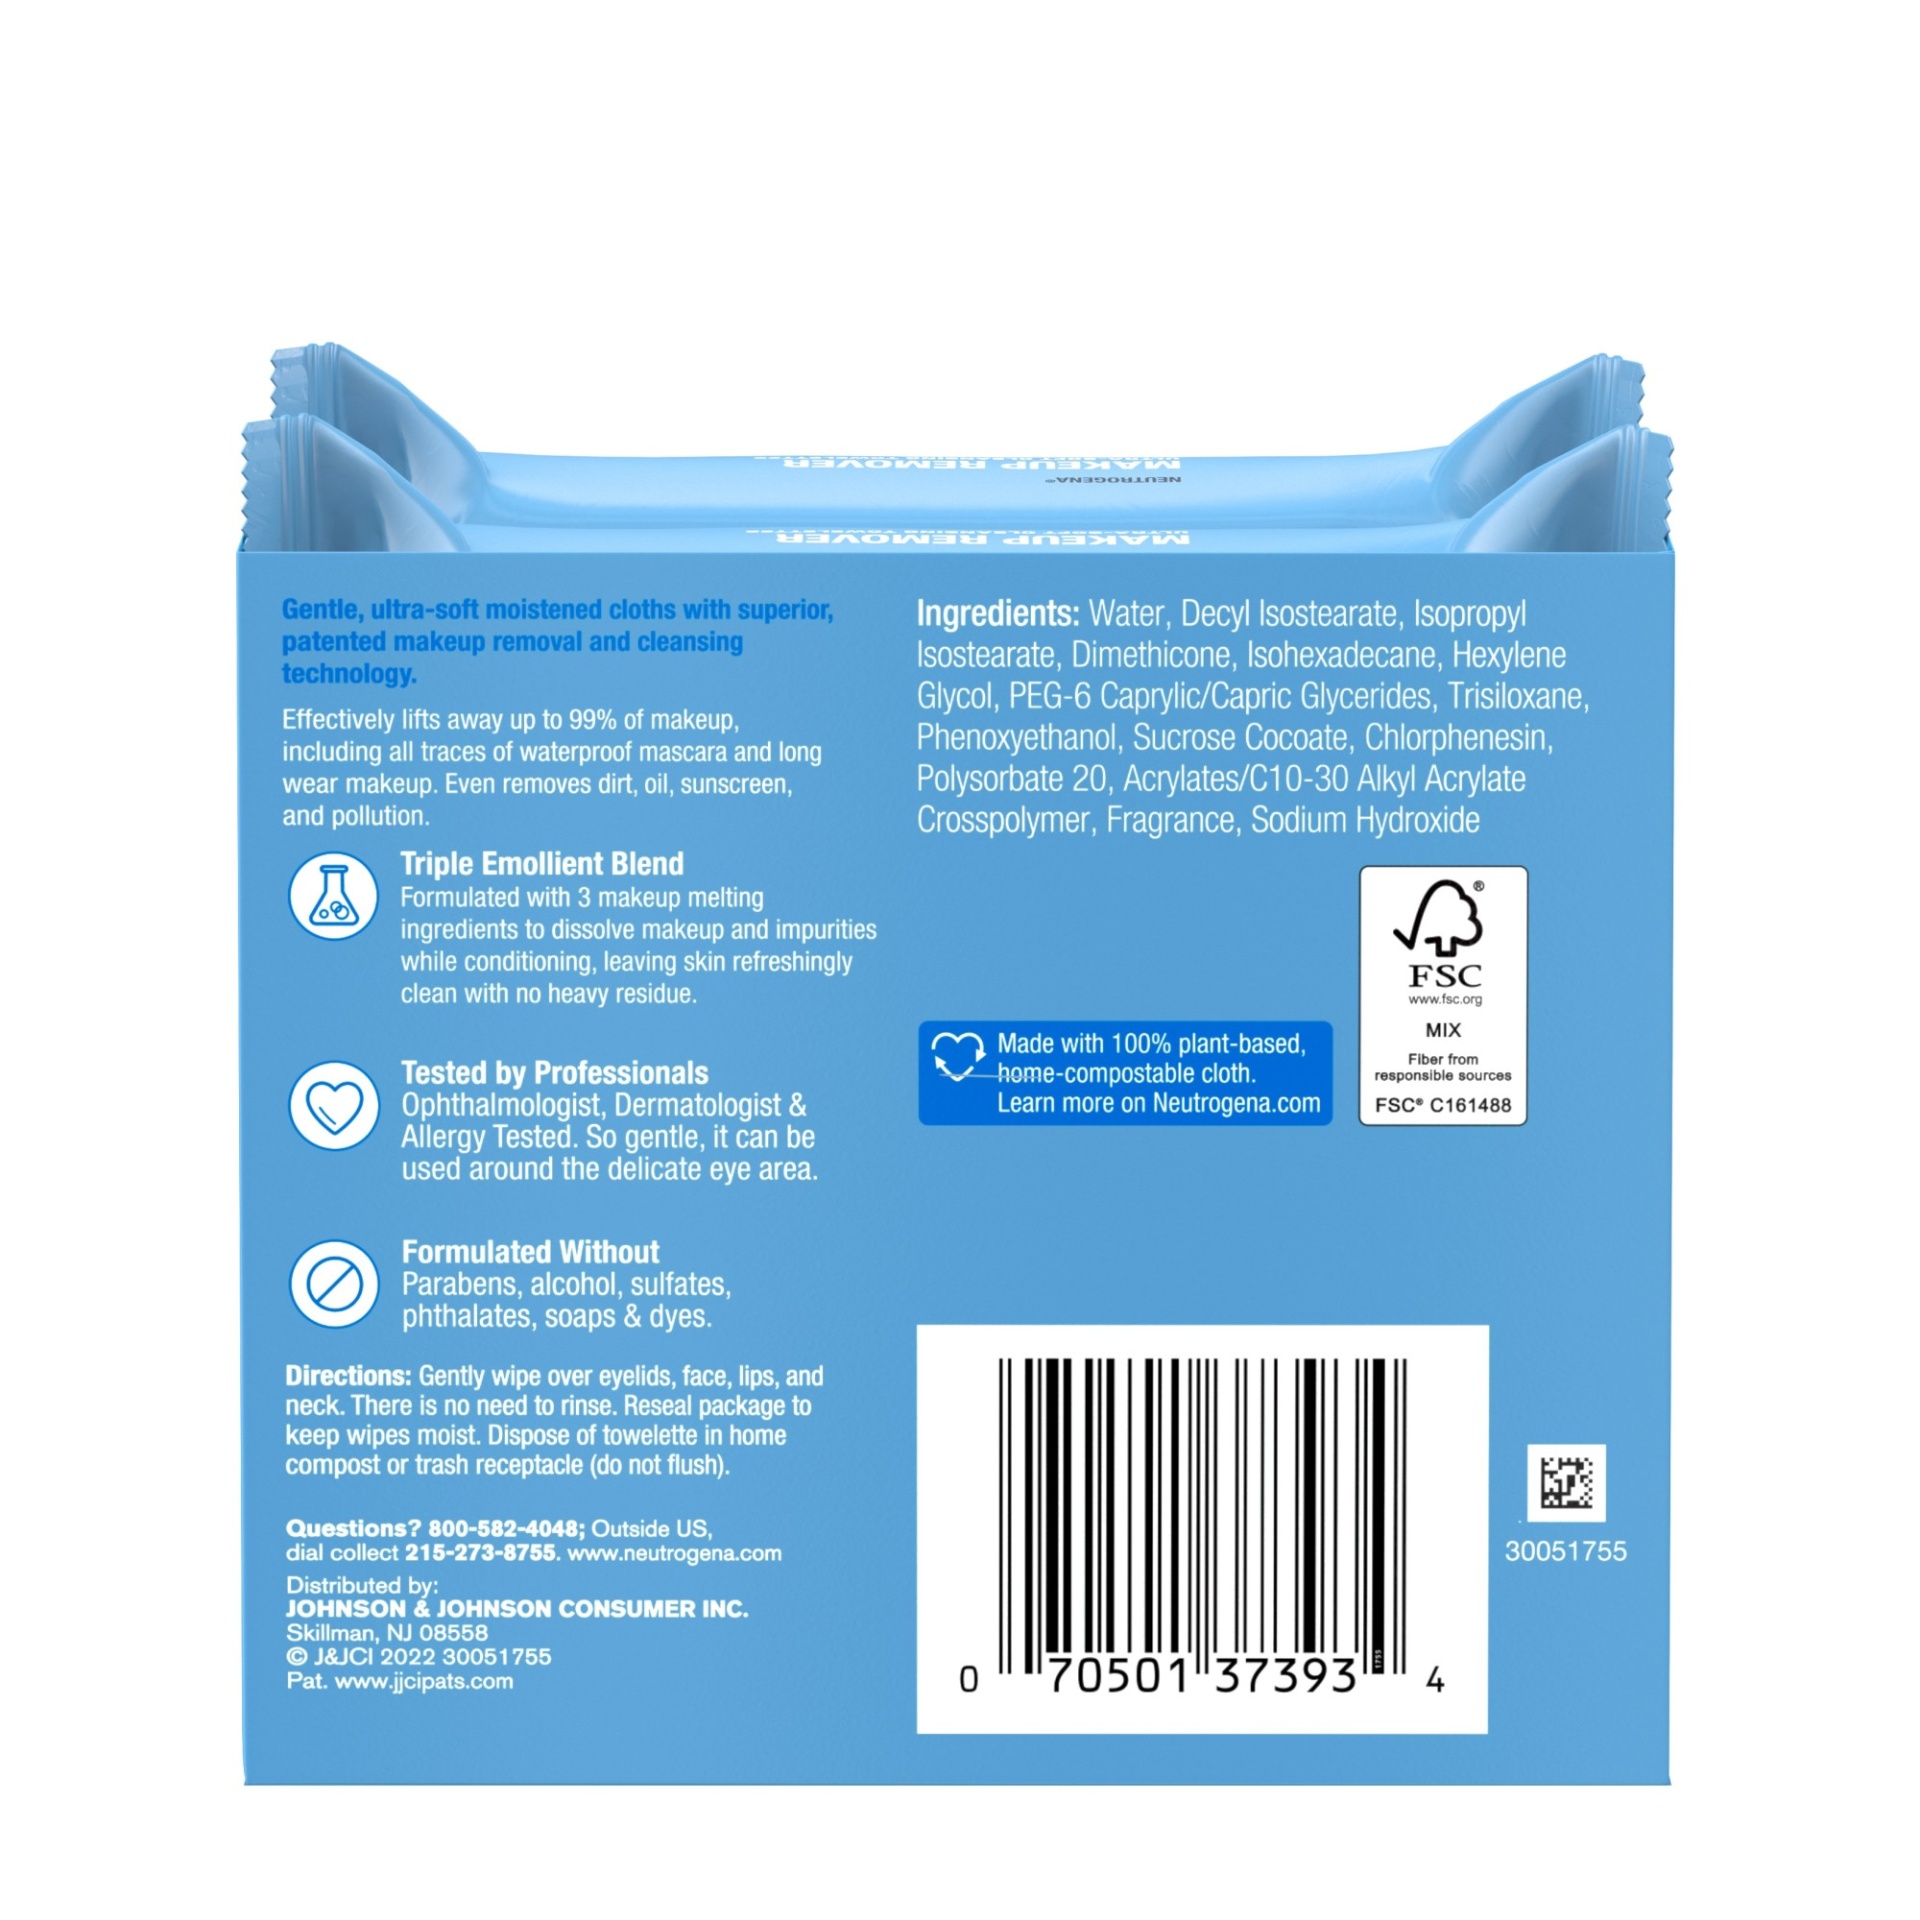 slide 2 of 7, Neutrogena Makeup Remover Cleansing Face Wipes, Daily Cleansing Facial Towelettes Remove Makeup & Waterproof Mascara, Alcohol-Free, 100% Plant-Based Fibers, Value Twin Pack, 25 ct; 2 ct